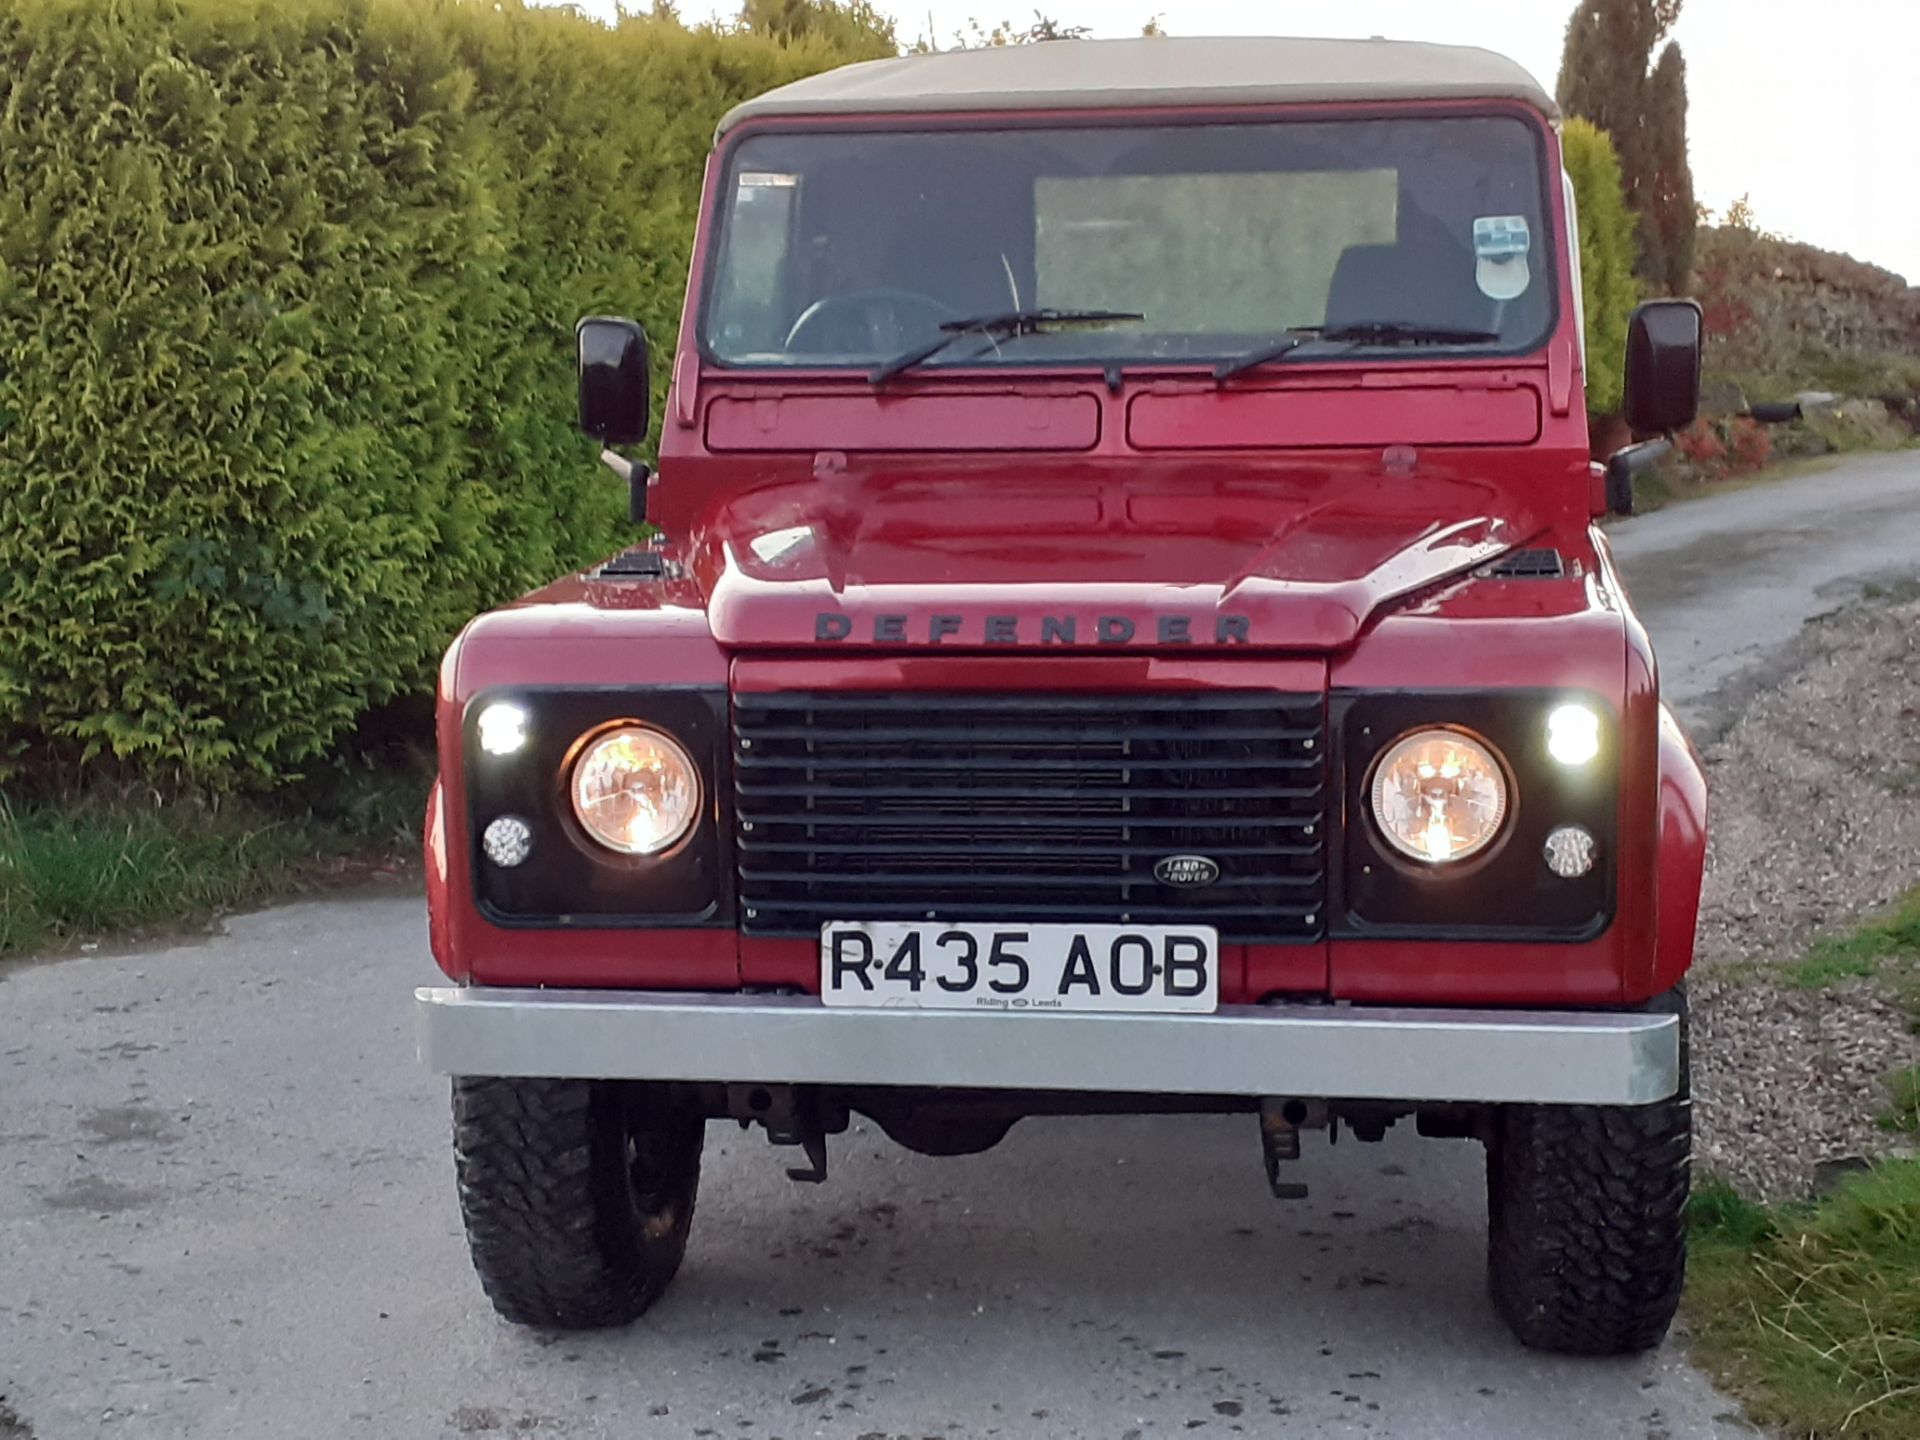 1998/R REG LAND ROVER DEFENDER 90 CSW TDI 95 RED CONVERTIBLE 6 SEATER, SHOWING 2 FORMER KEEPERS - Image 4 of 9